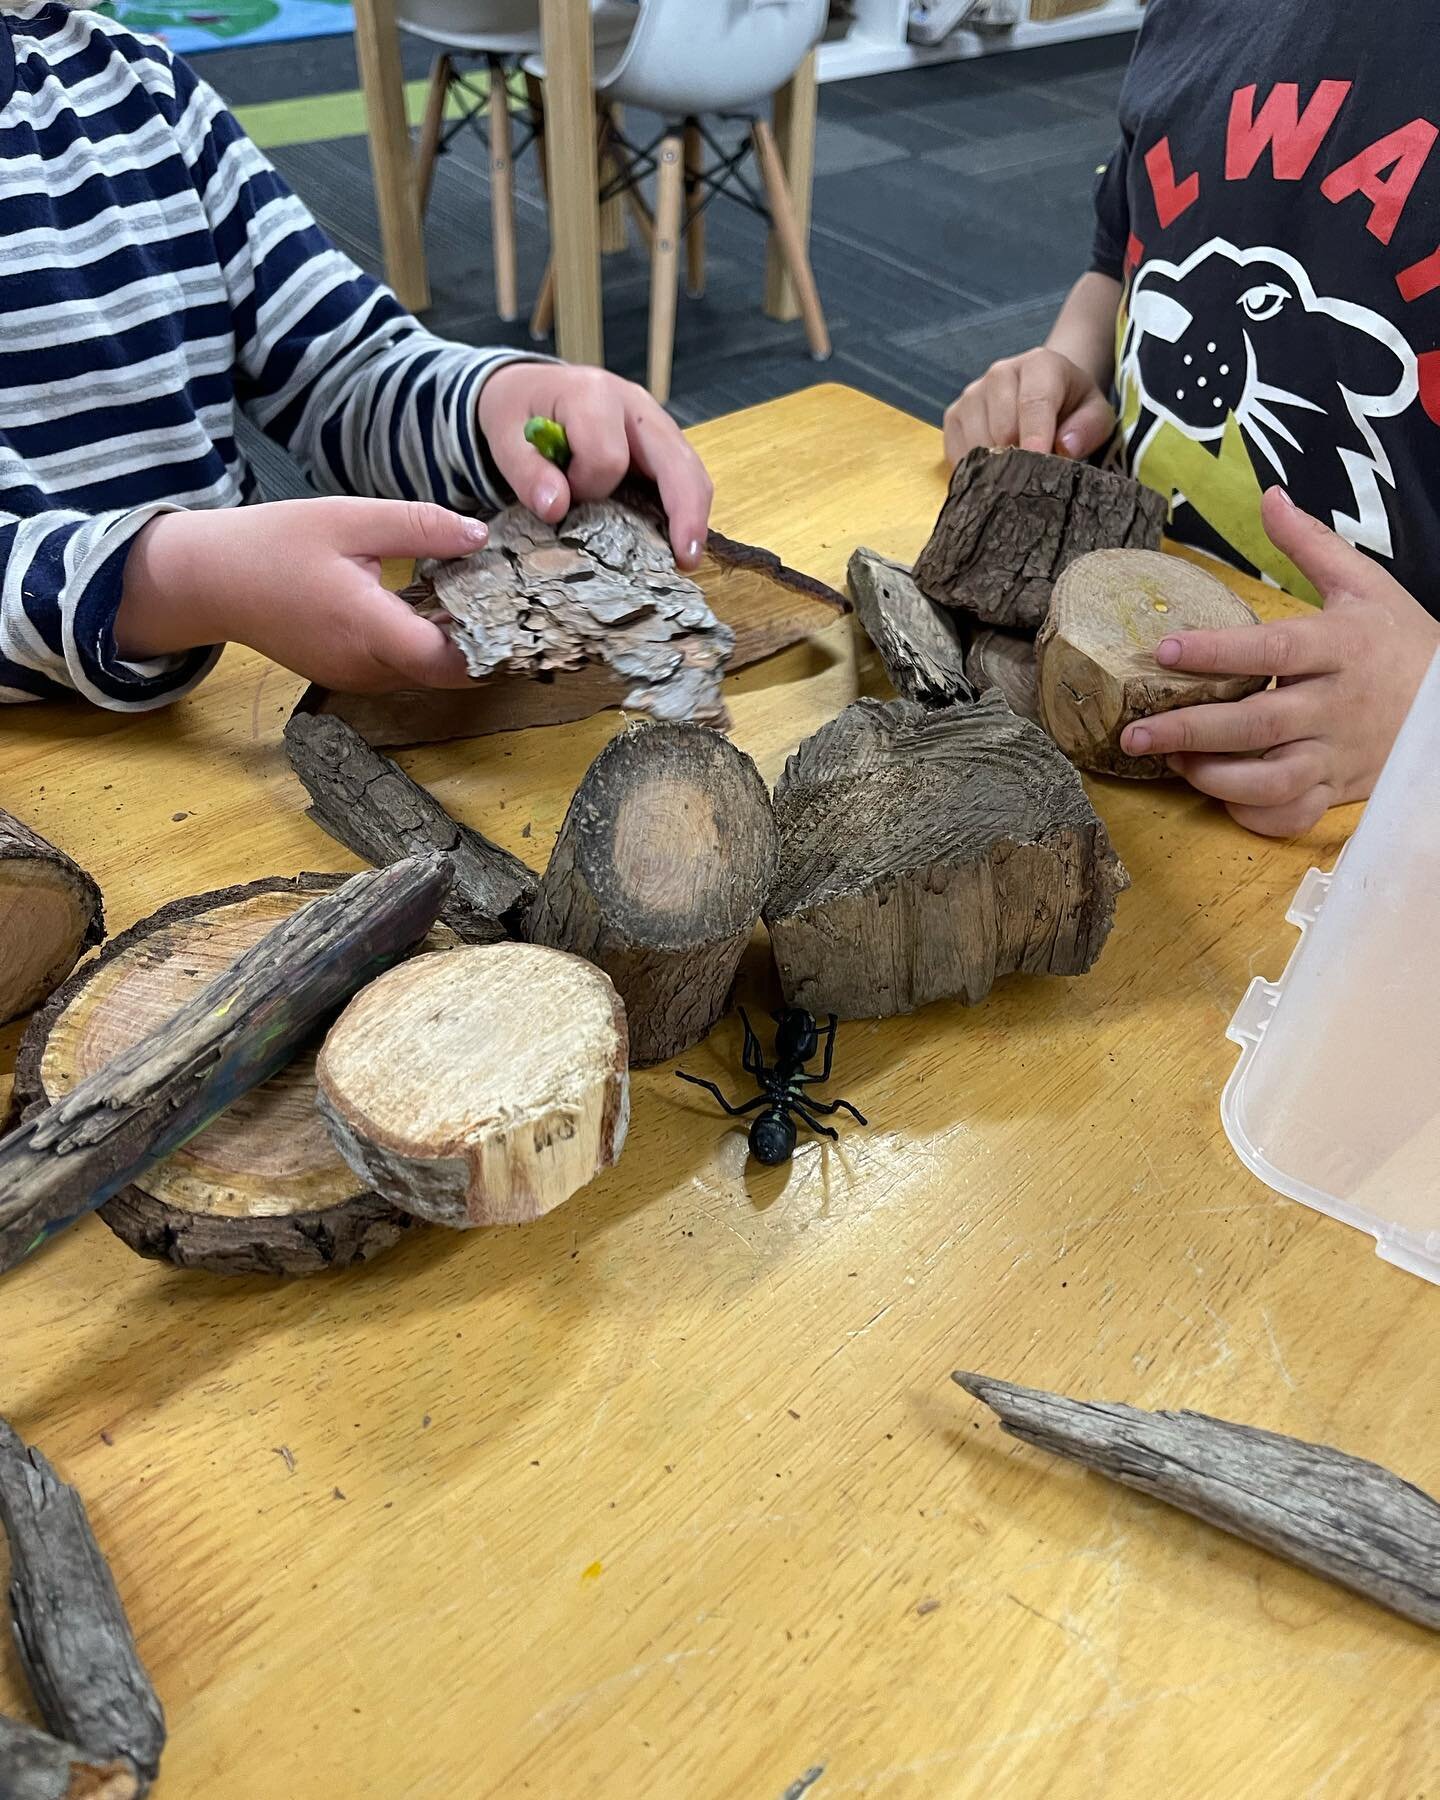 Hello all and happy Friday! Here we have our Duck class friends engaging in bug exploration. With our hands-on approach to learning, the class continues to further their understanding about the environment around them. With curiosity as the forefront